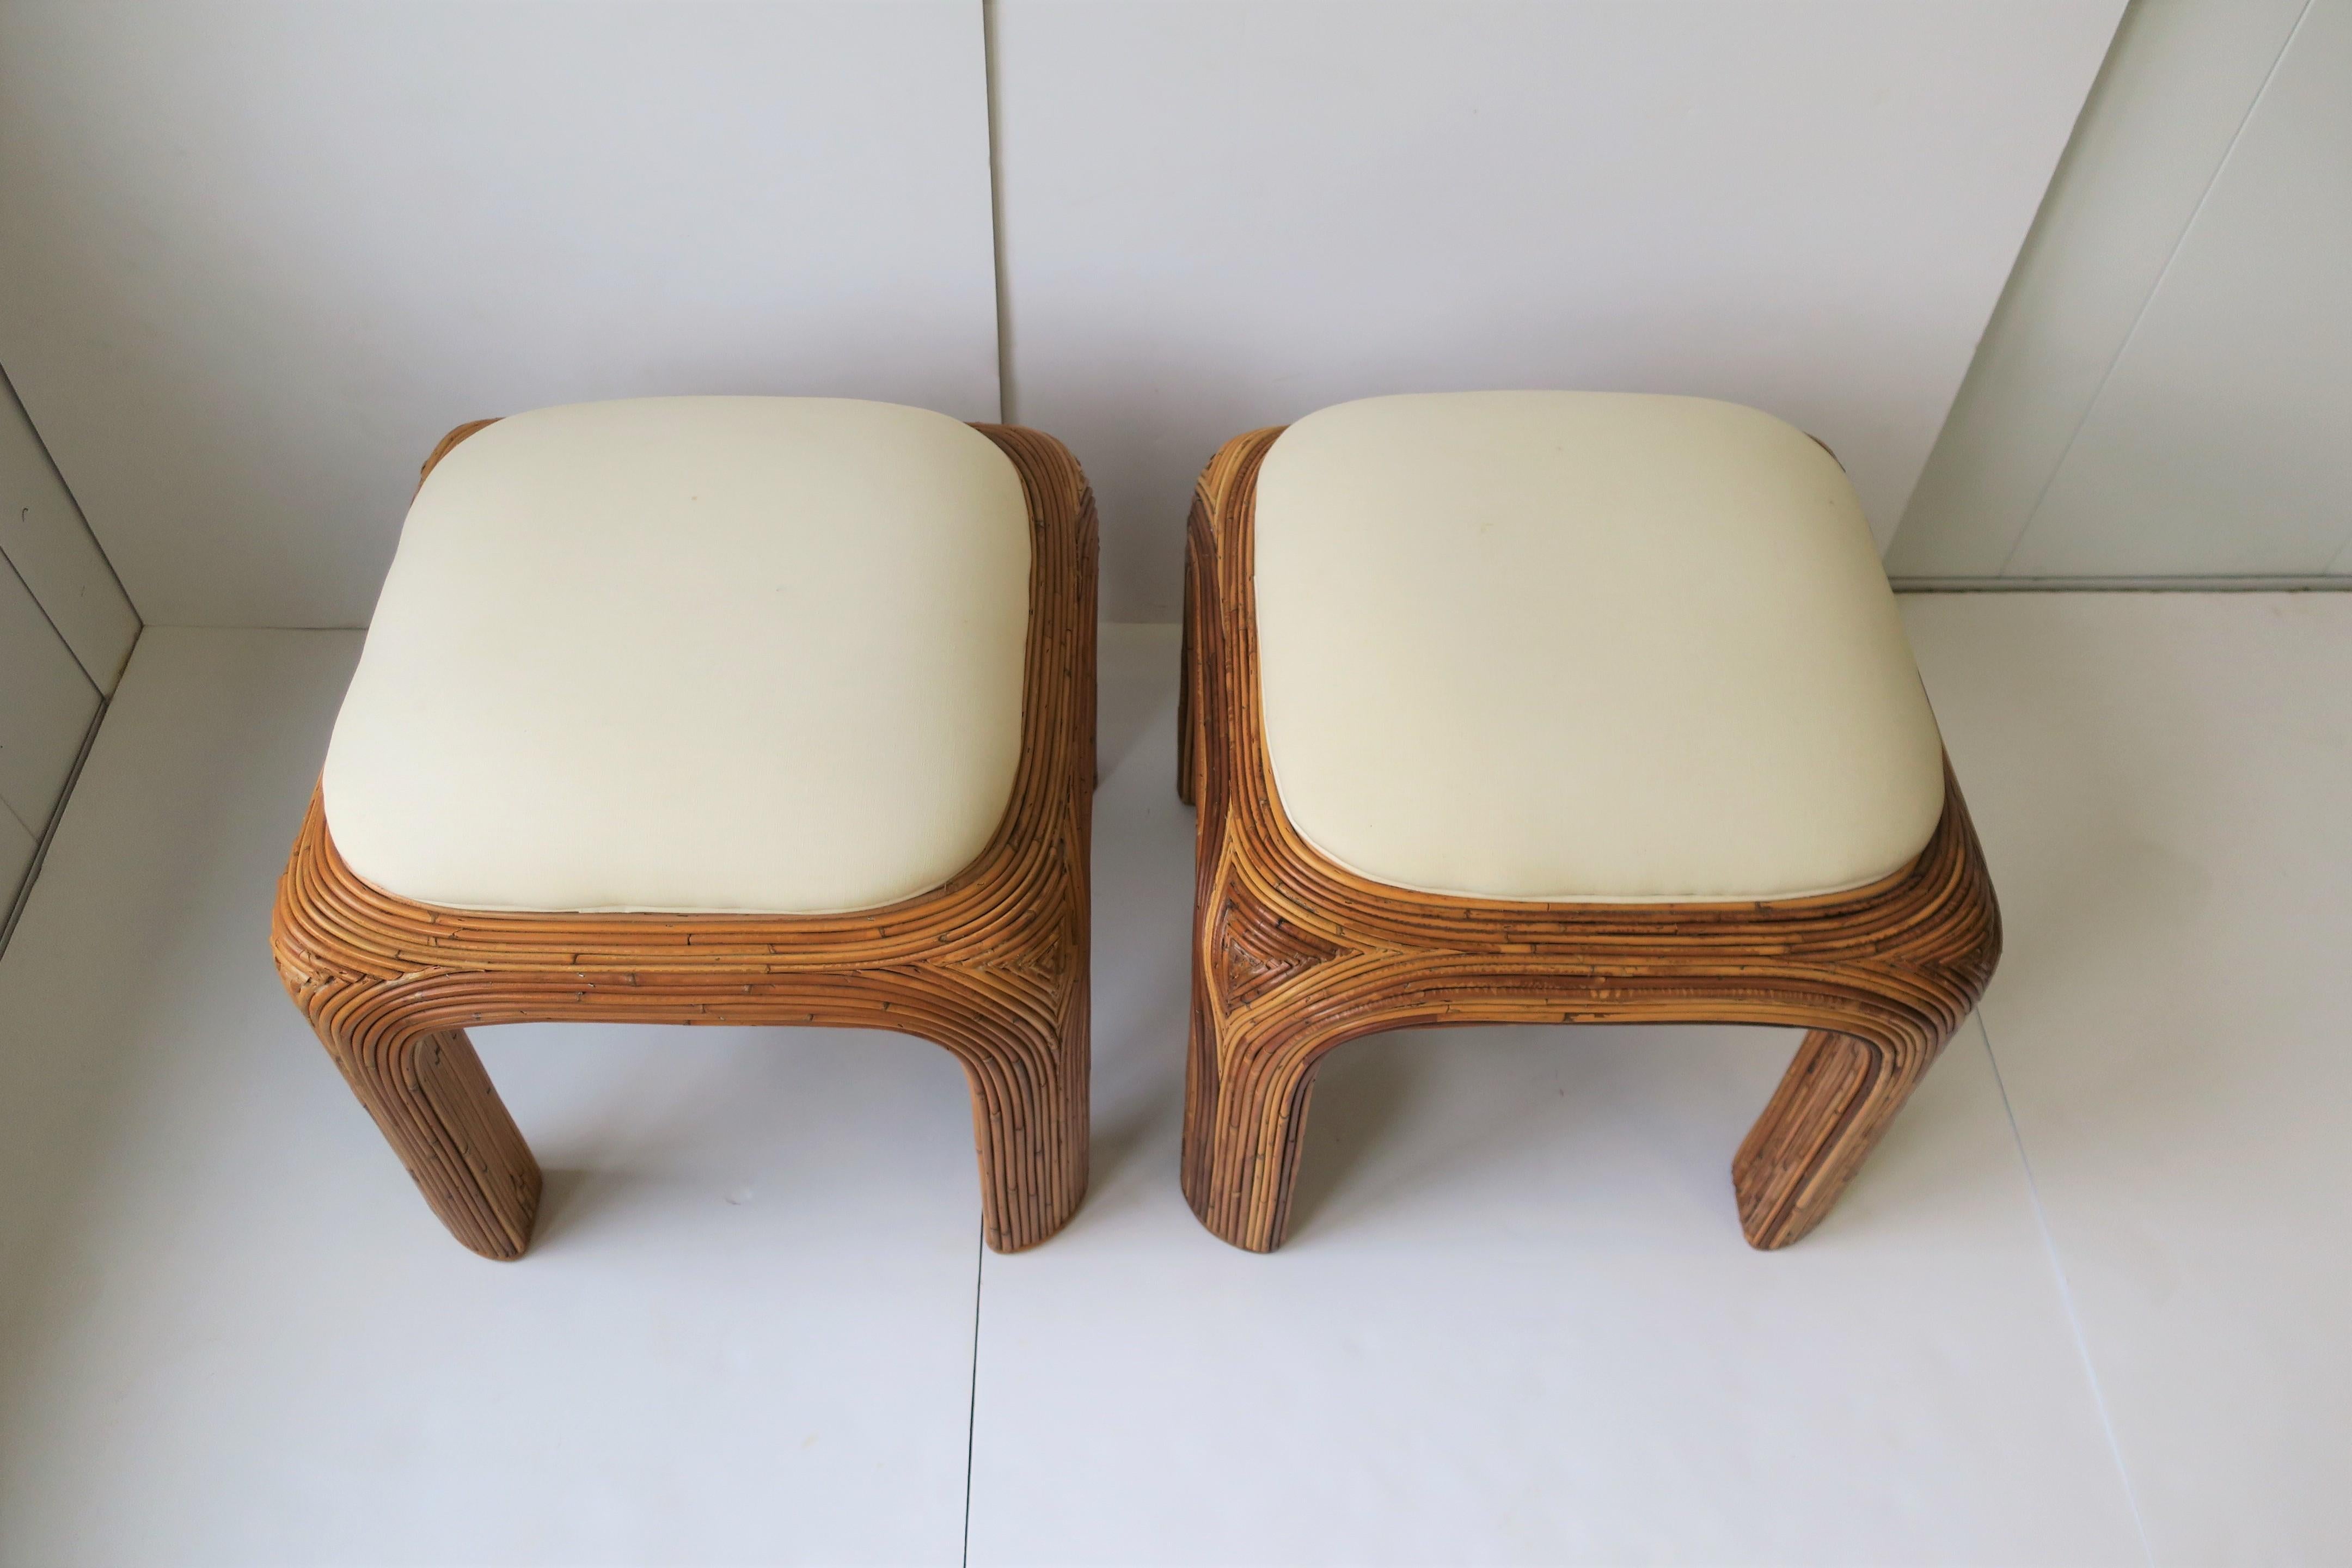 American Pair of Wicker Pencil Reed Upholstered Stools or Benches after Gabriella Crespi